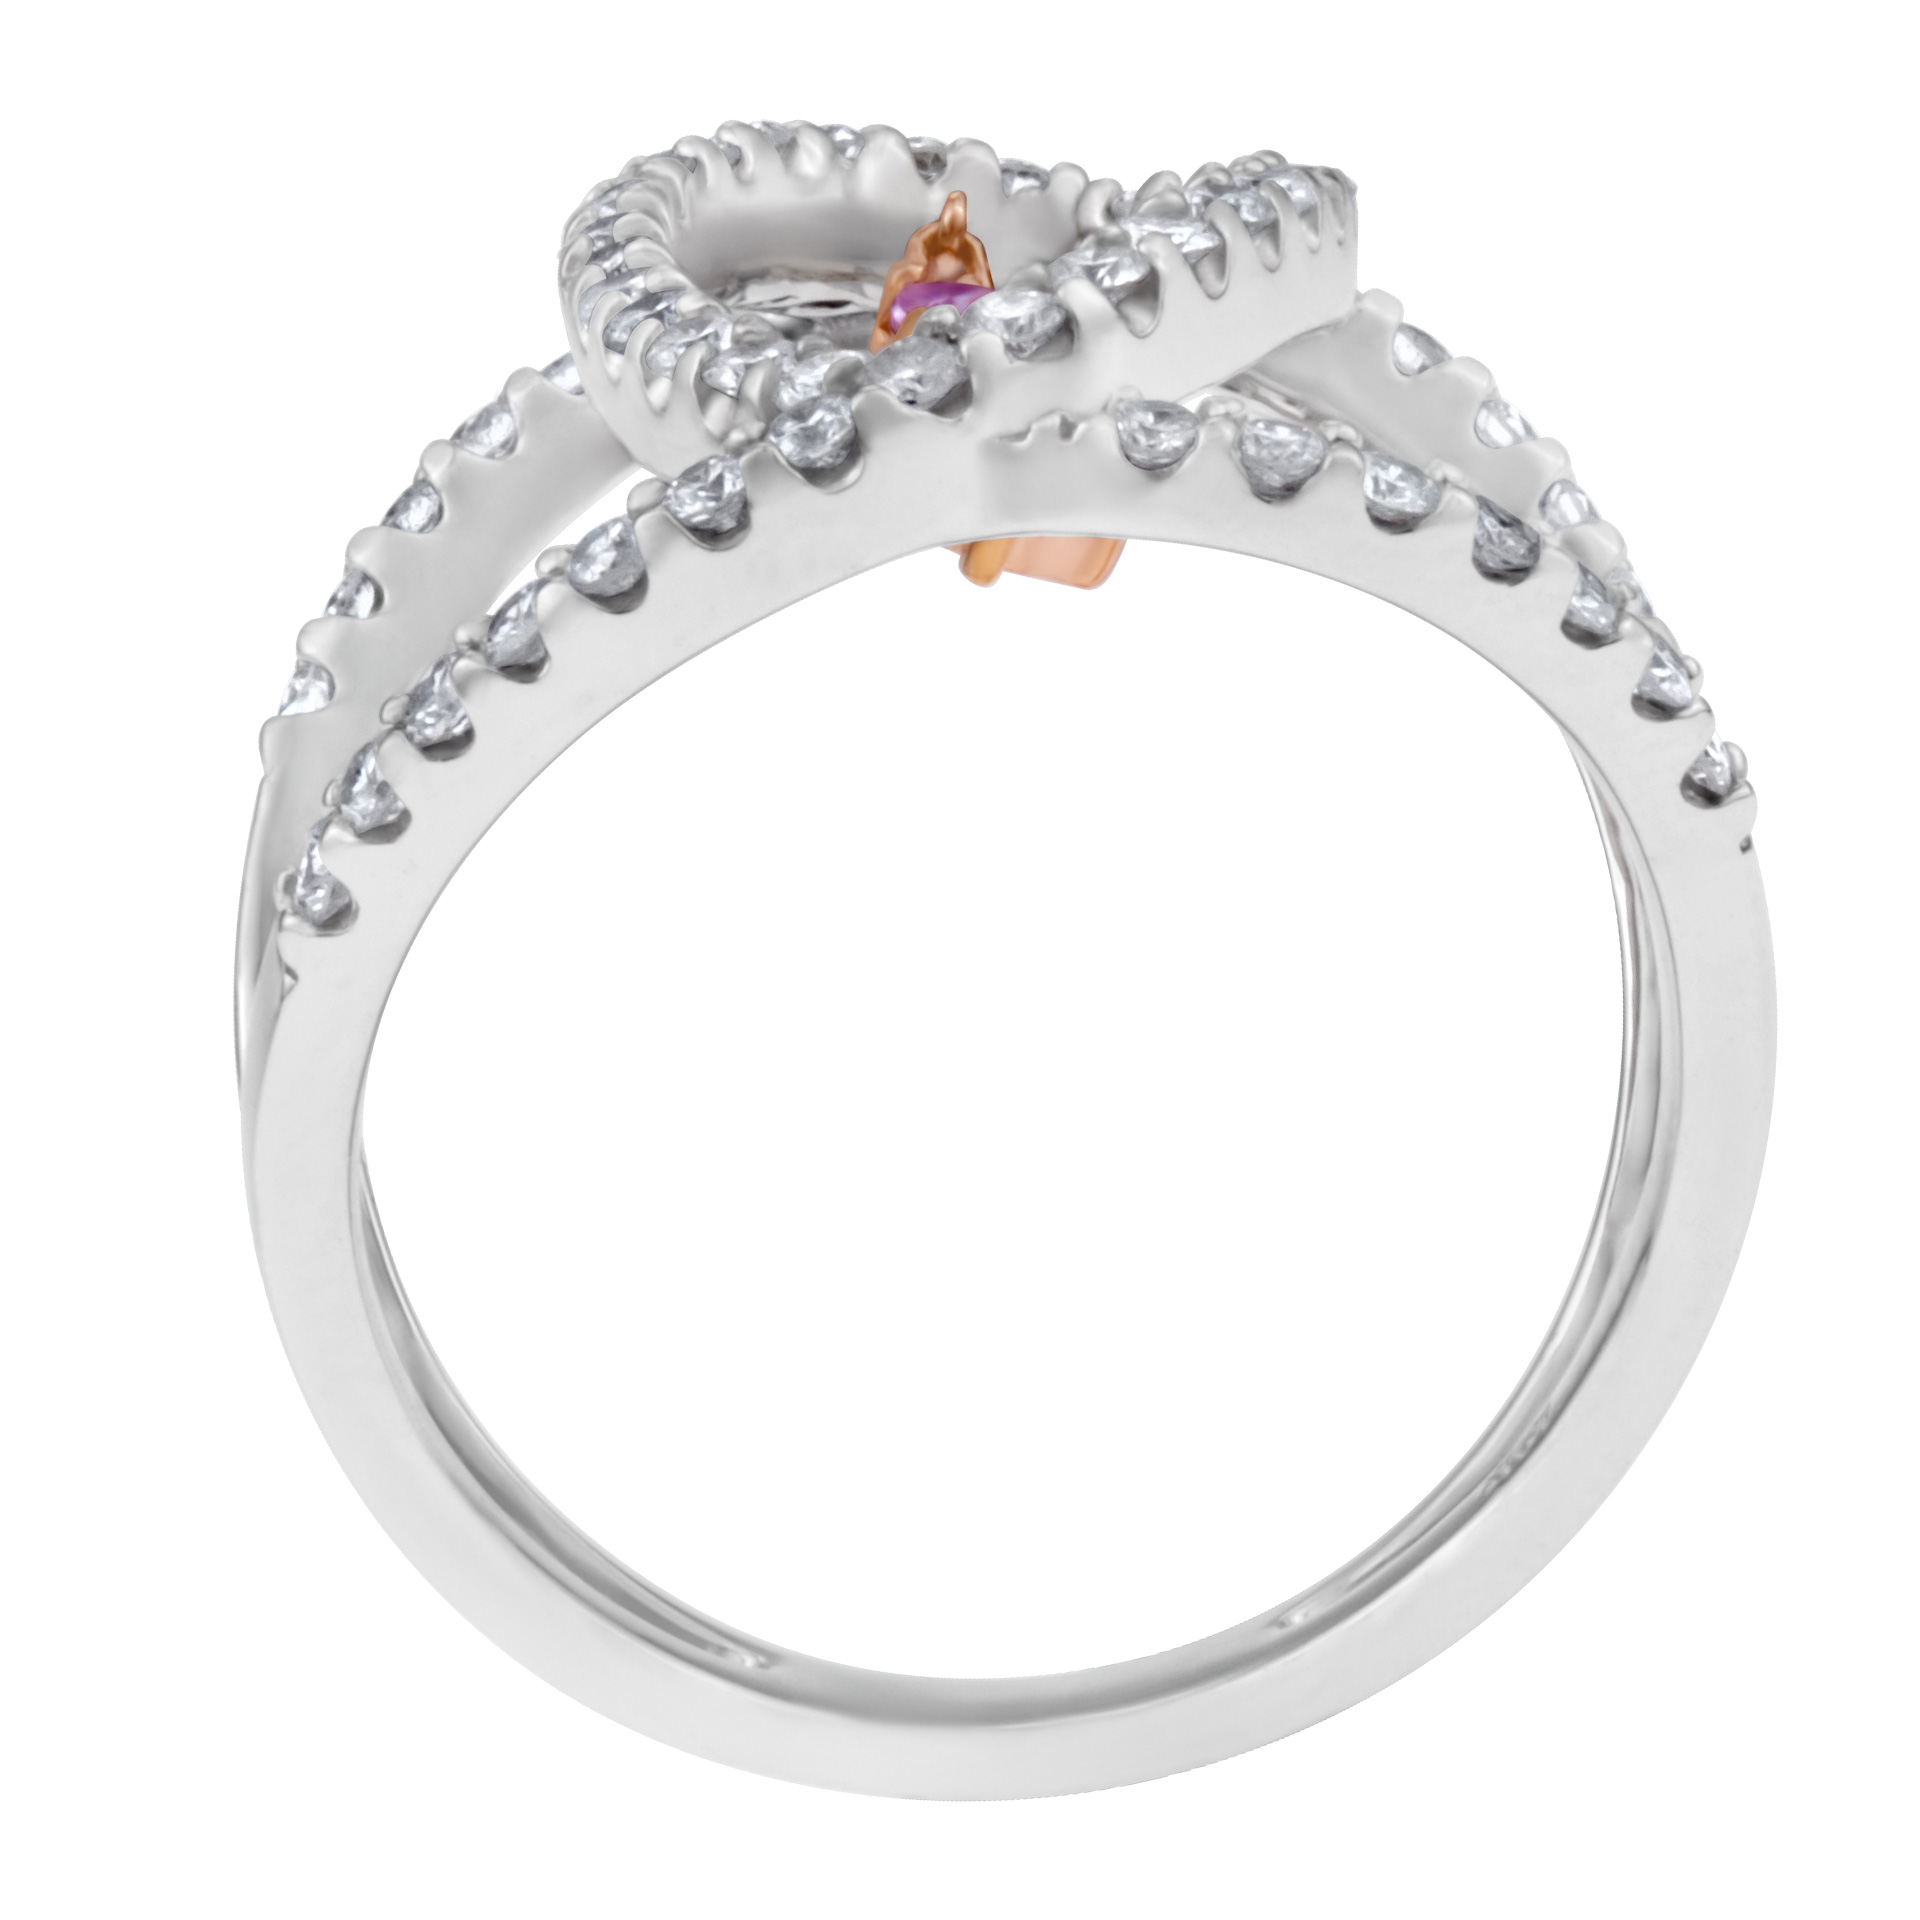 18k white gold diamond ring with pink center. 0.74 carats in diamonds. Size 6.5 image 2